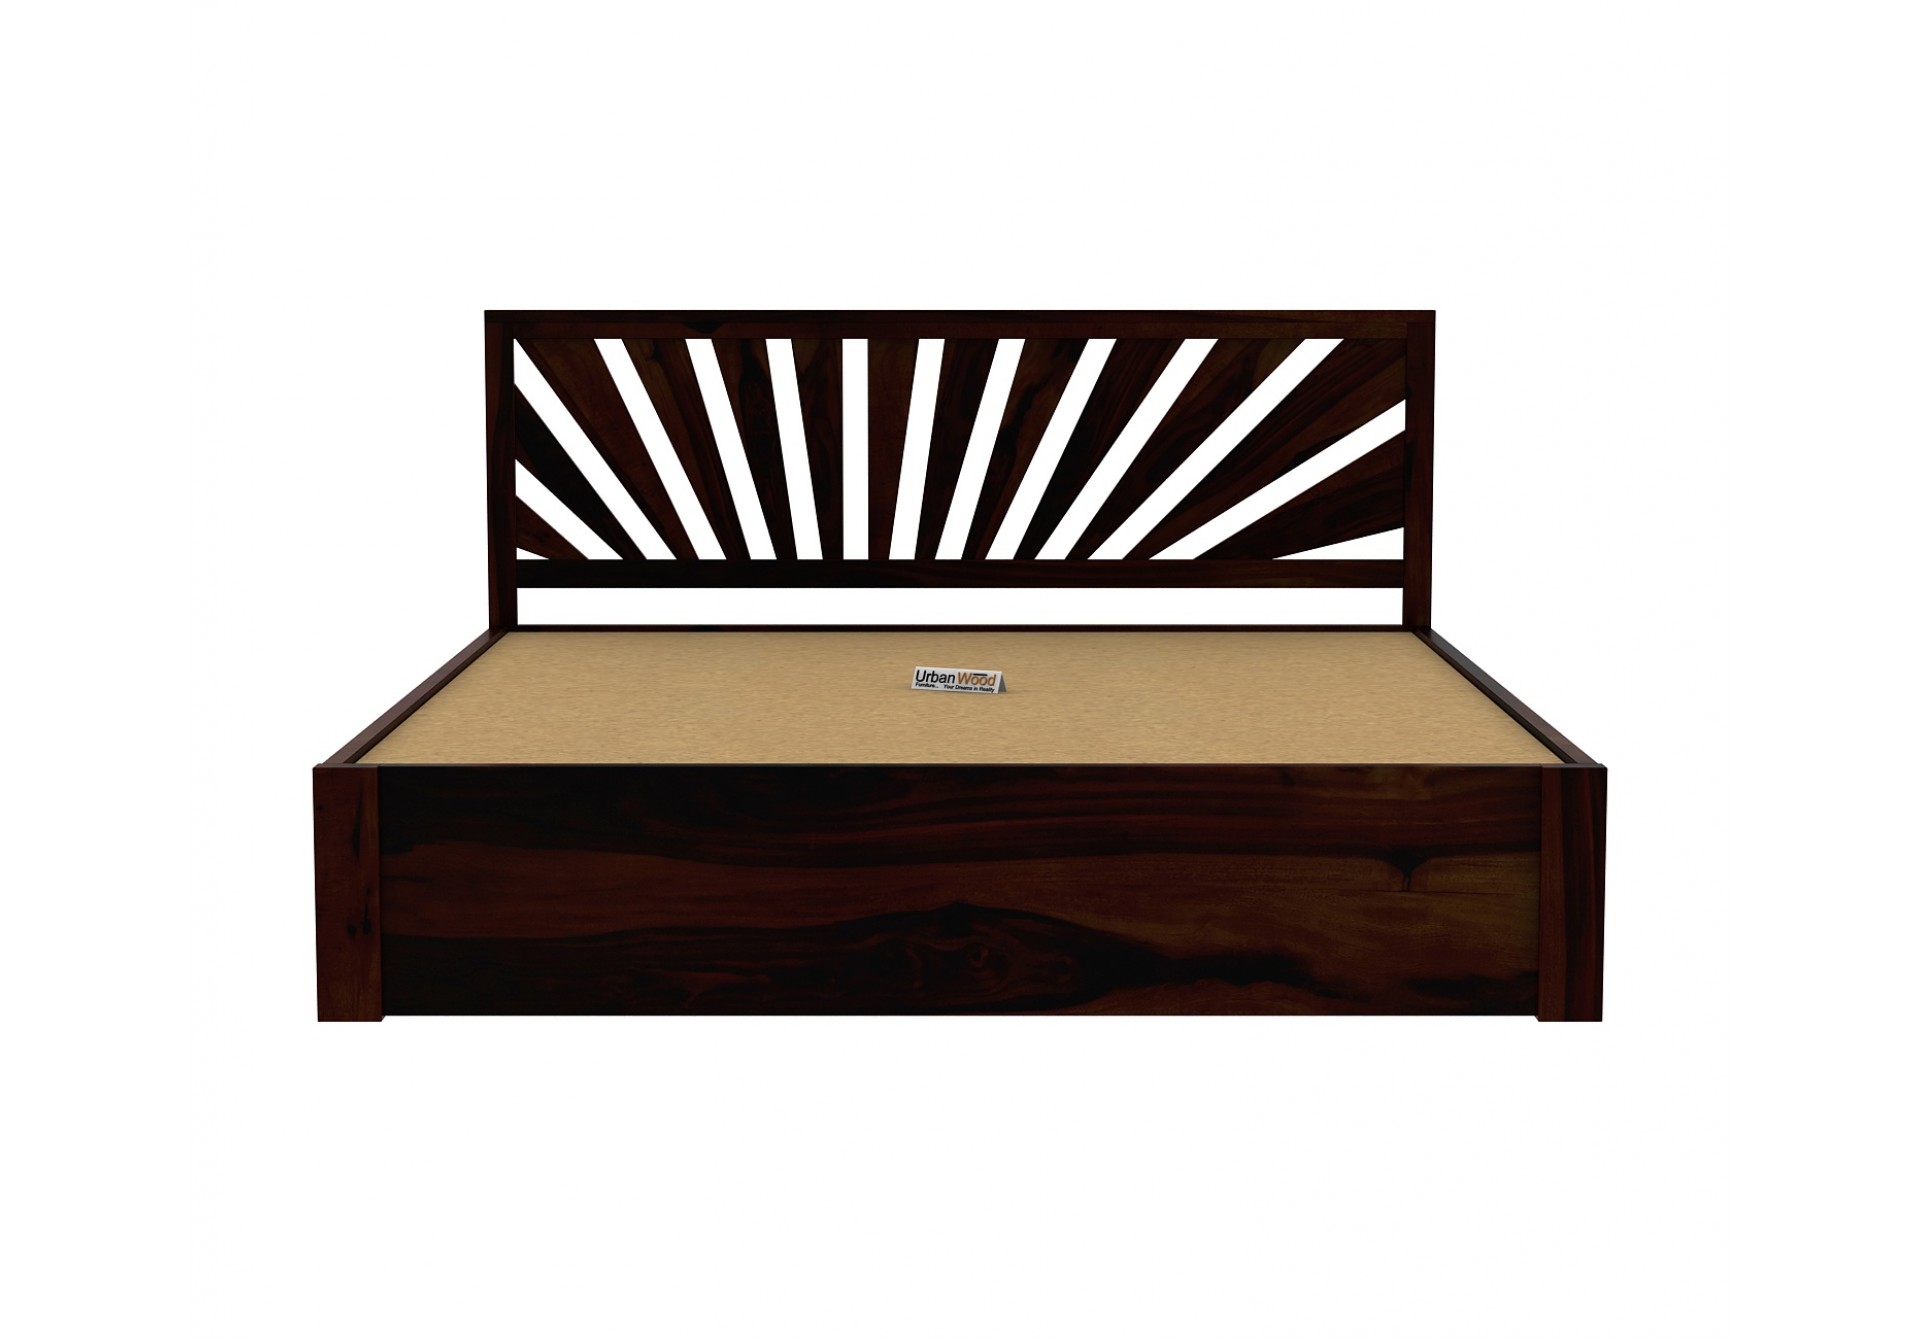 Jerry Wooden Hydraulic Bed King Size (Walnut Finish)